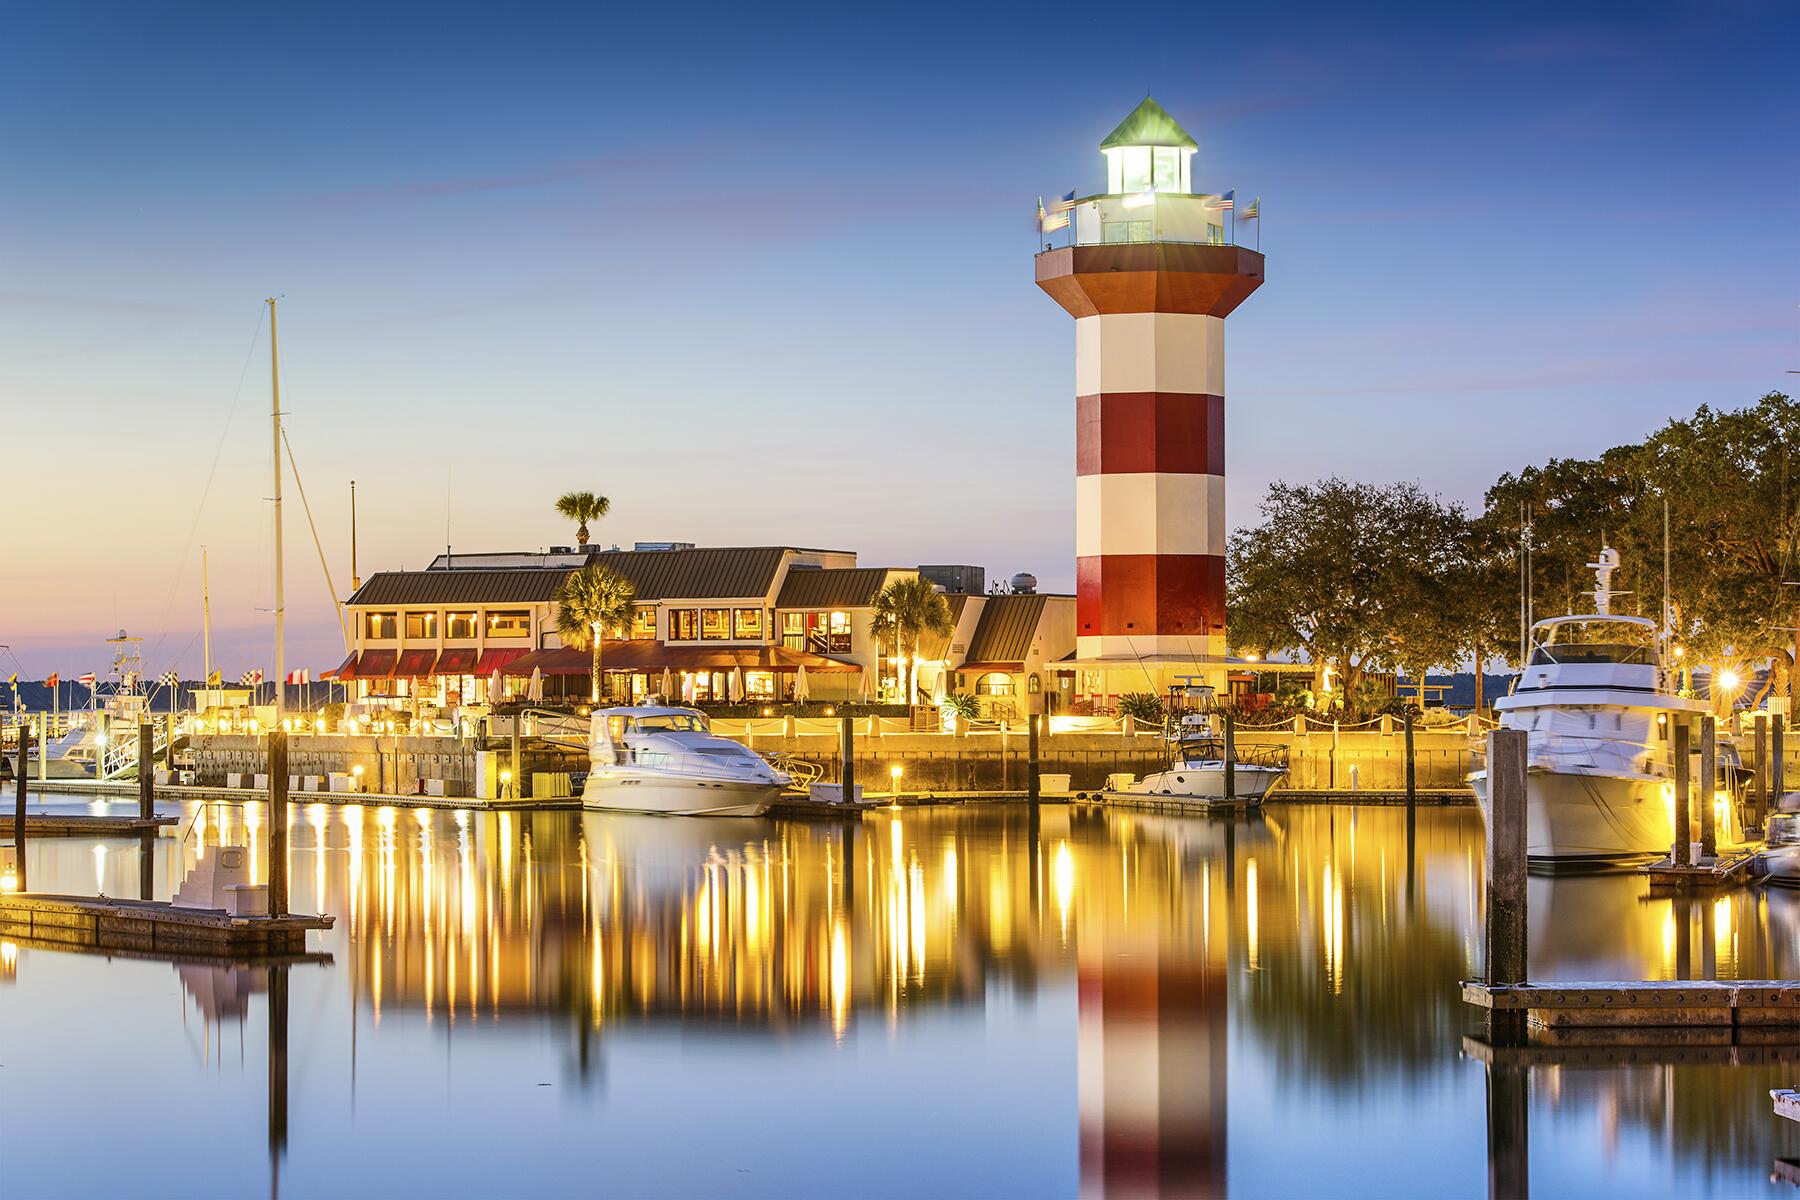 <a href='https://www.fodors.com/world/north-america/usa/south-carolina/charleston/experiences/news/photos/the-best-day-trips-to-take-from-charleston-south-carolina#'>From &quot;The 10 Best Day Trips From Charleston: Hilton Head Island&quot;</a>